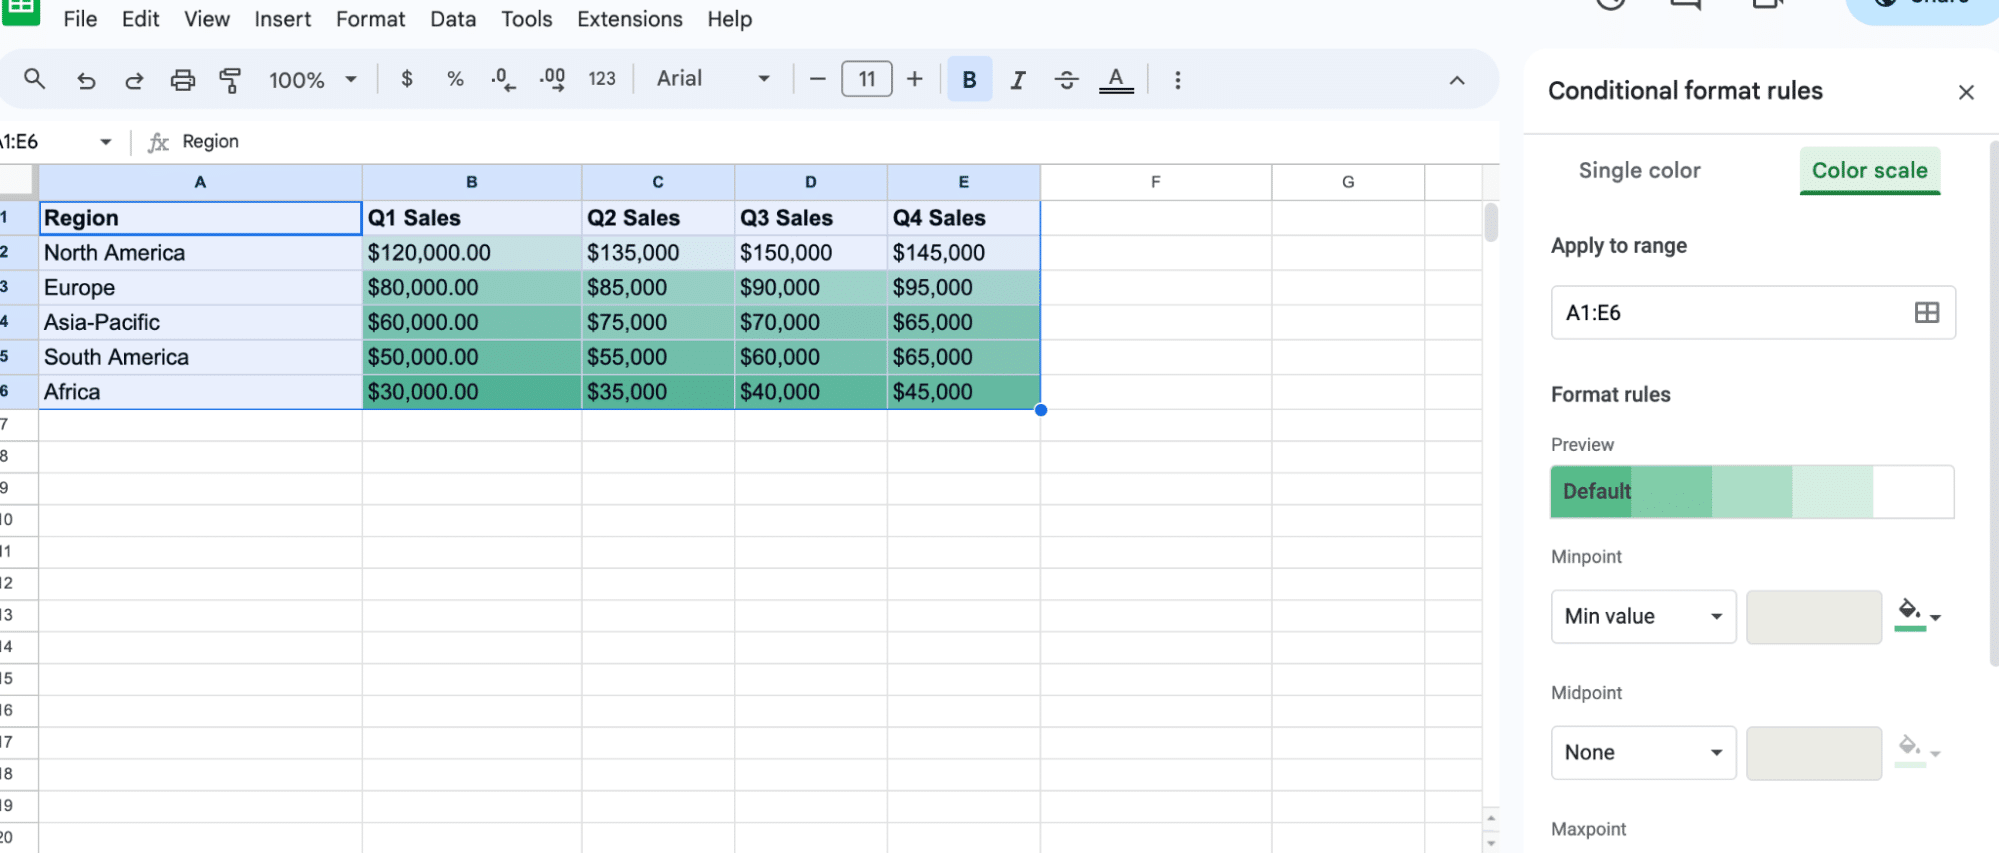 Selecting between Single color and Color scale options in Google Sheets.